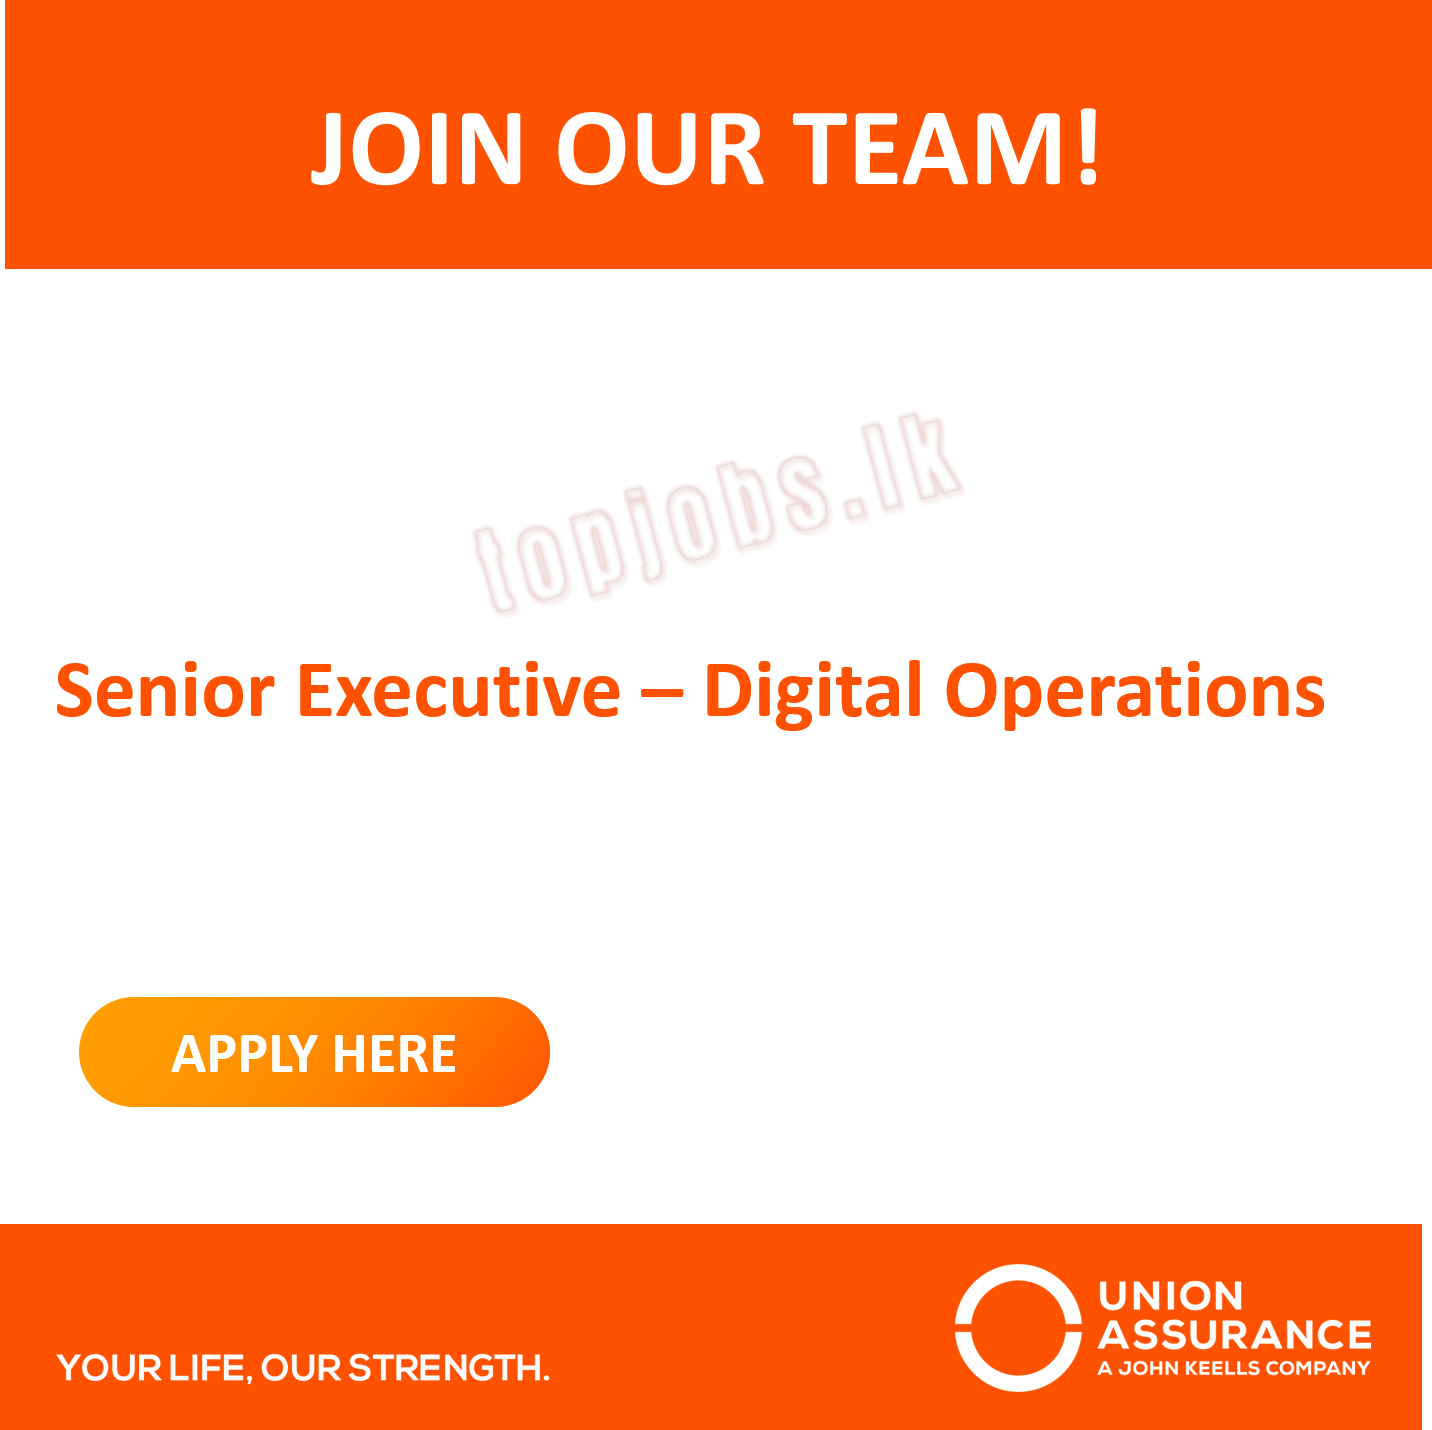 Senior Executive Jobs in Digital Operations at Union Assurance English Details